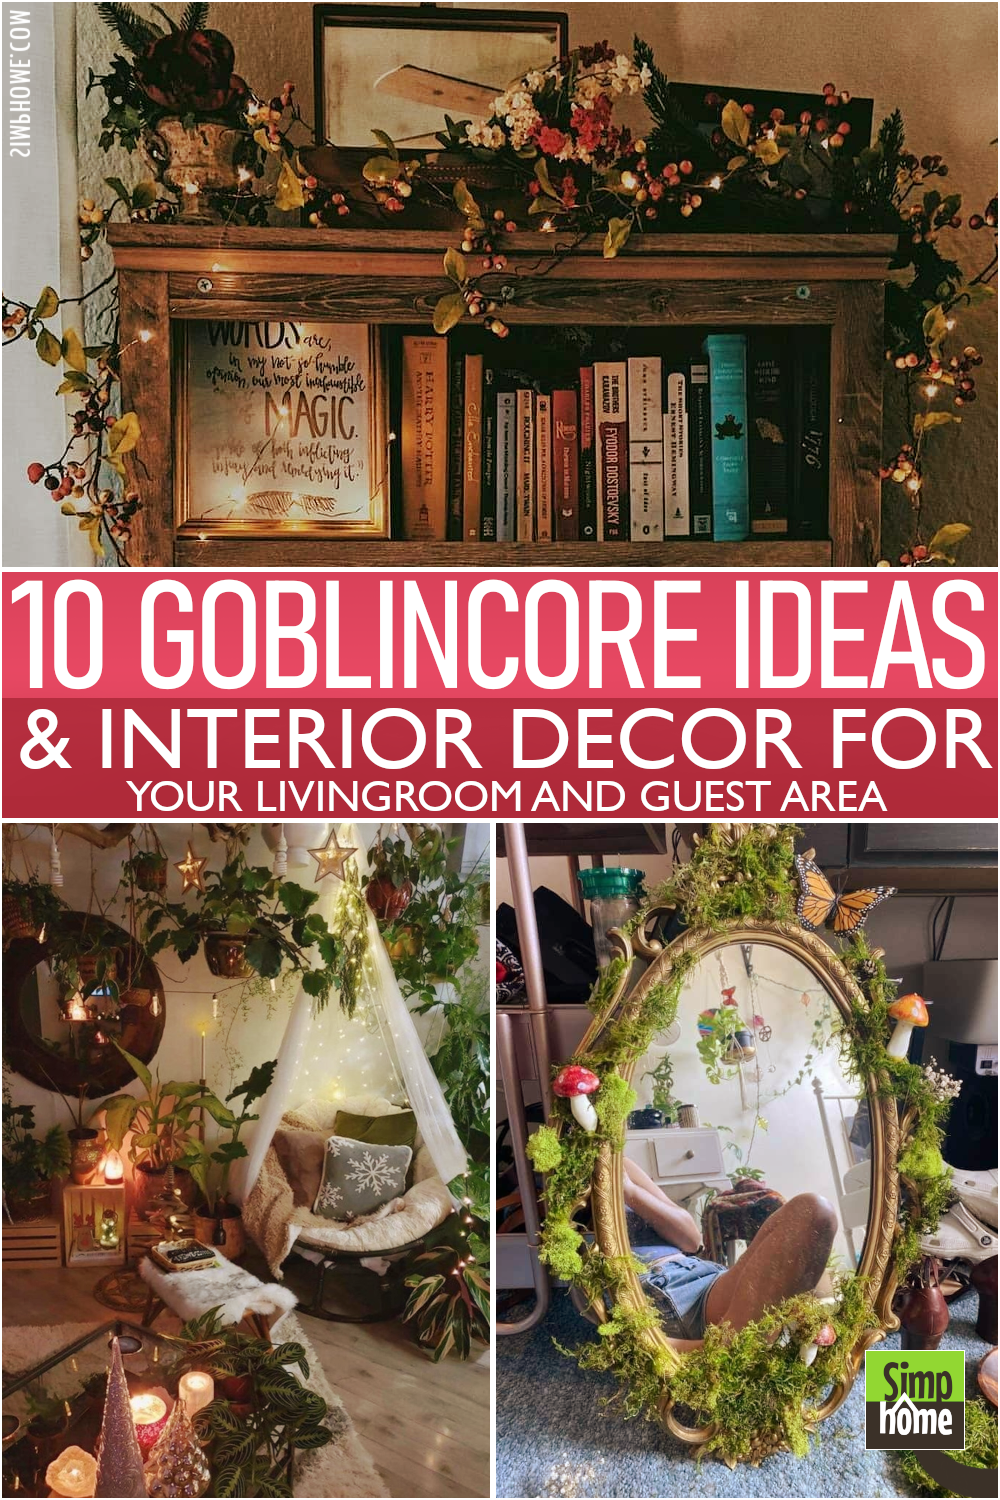 10 Goblincore ideas to Refresh your House Interior Poster